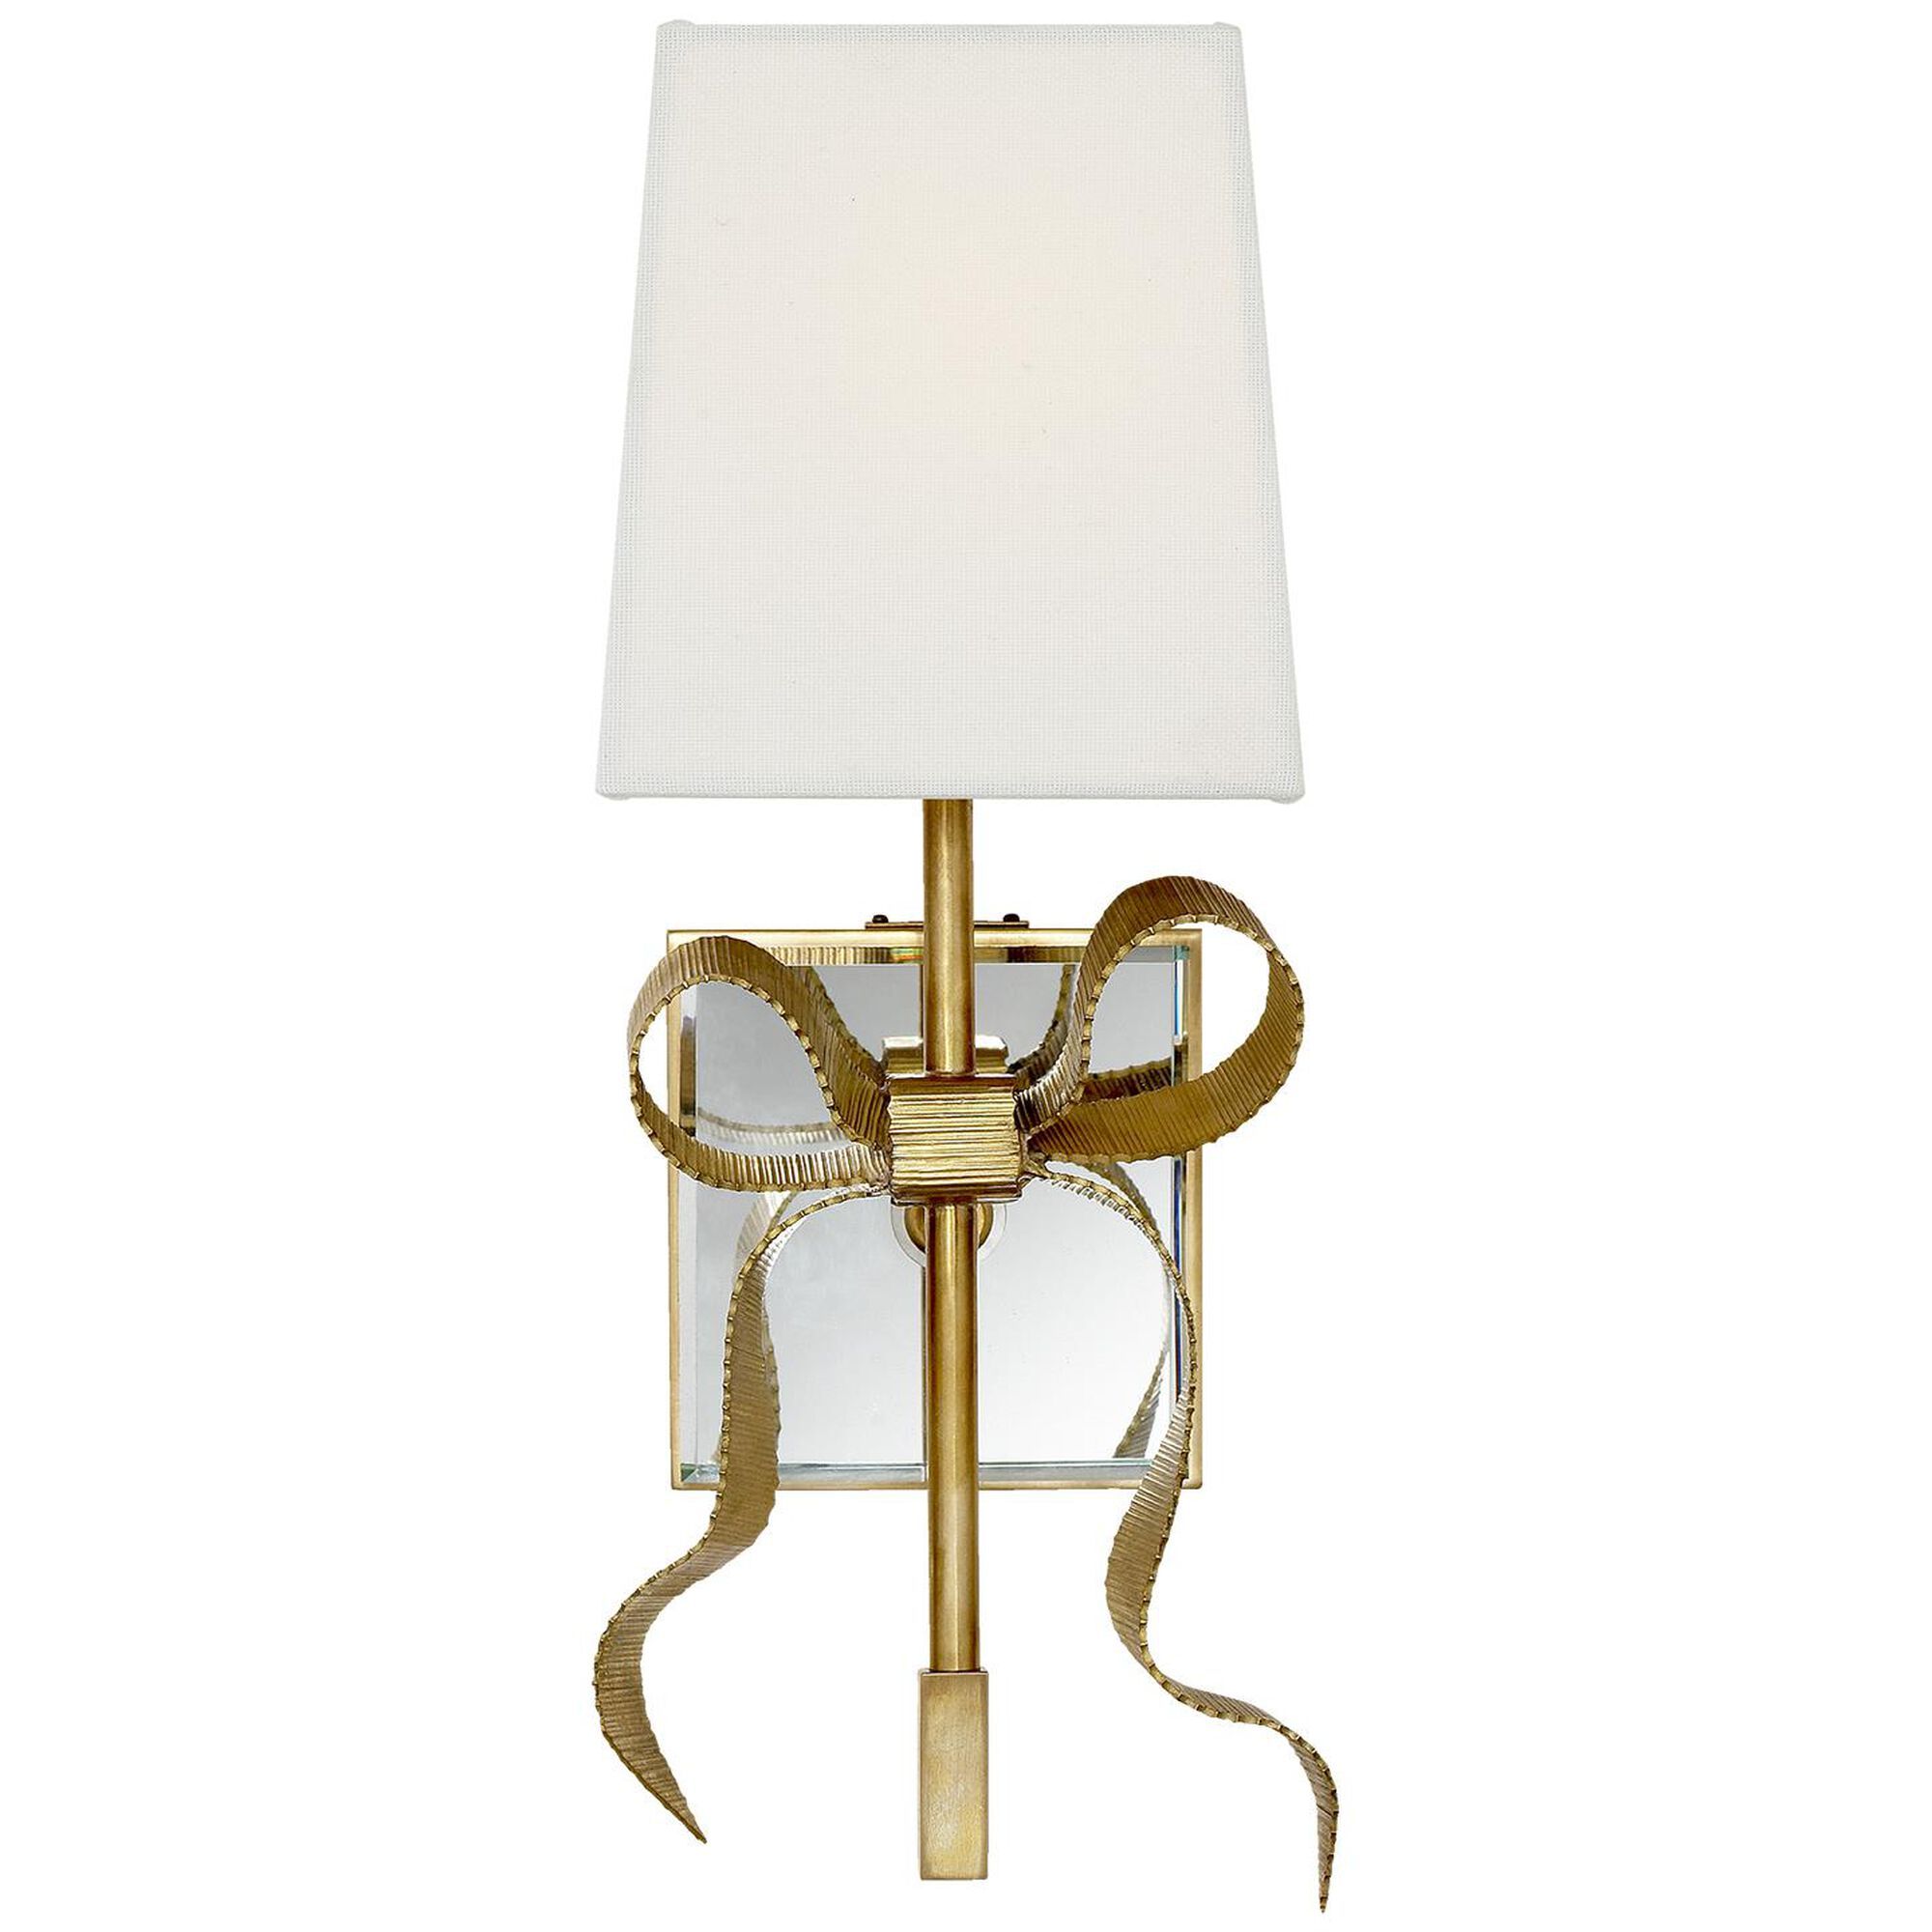 Kate Spade New York Ellery 13 Inch Wall Sconce by Visual Comfort and Co. | Capitol Lighting 1800lighting.com